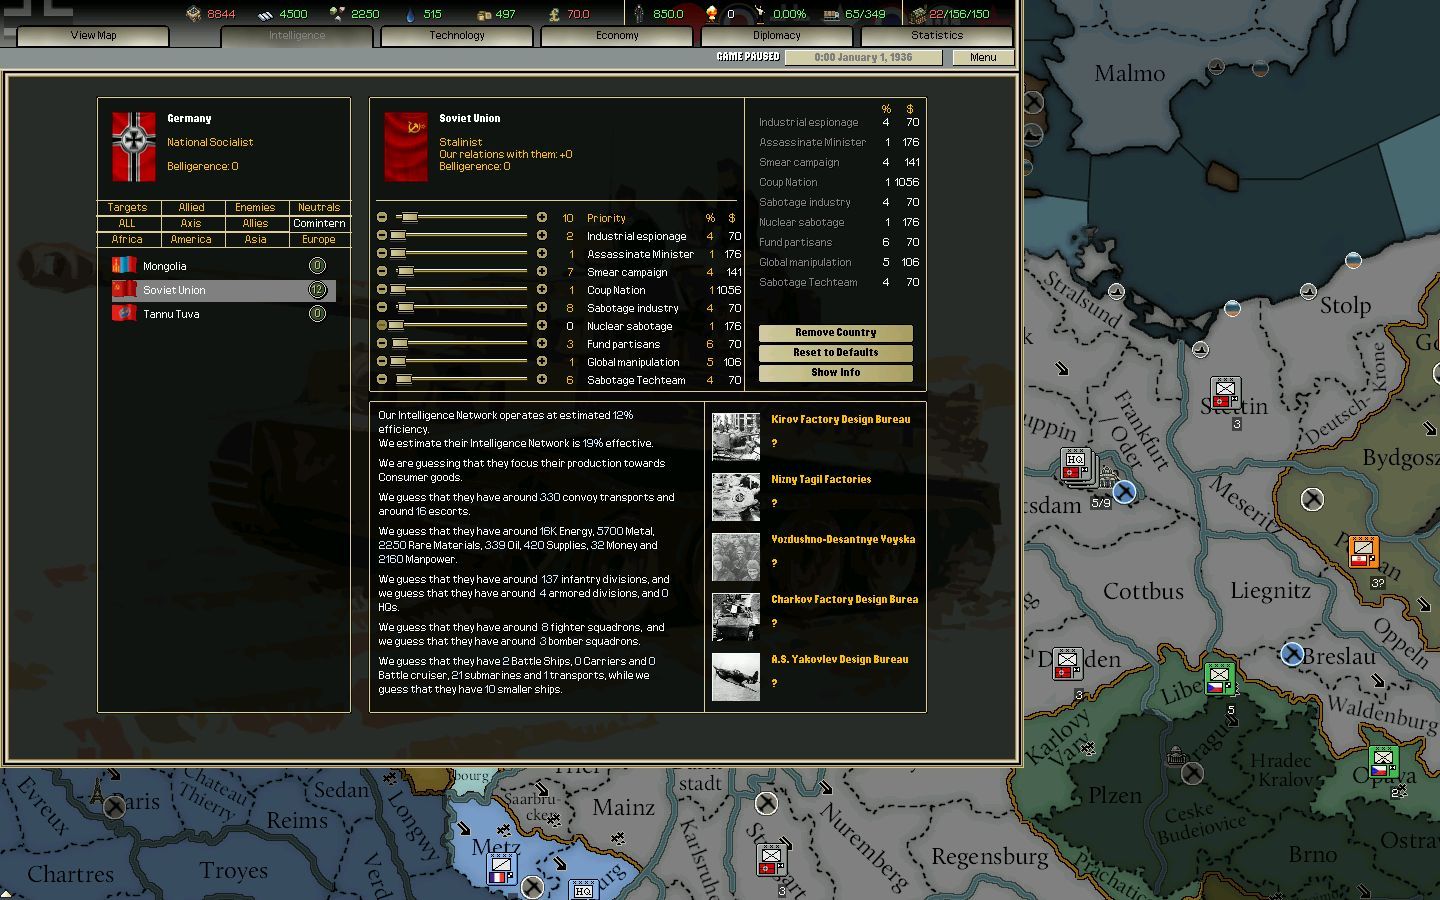 darkest hour a hearts of iron game army loses